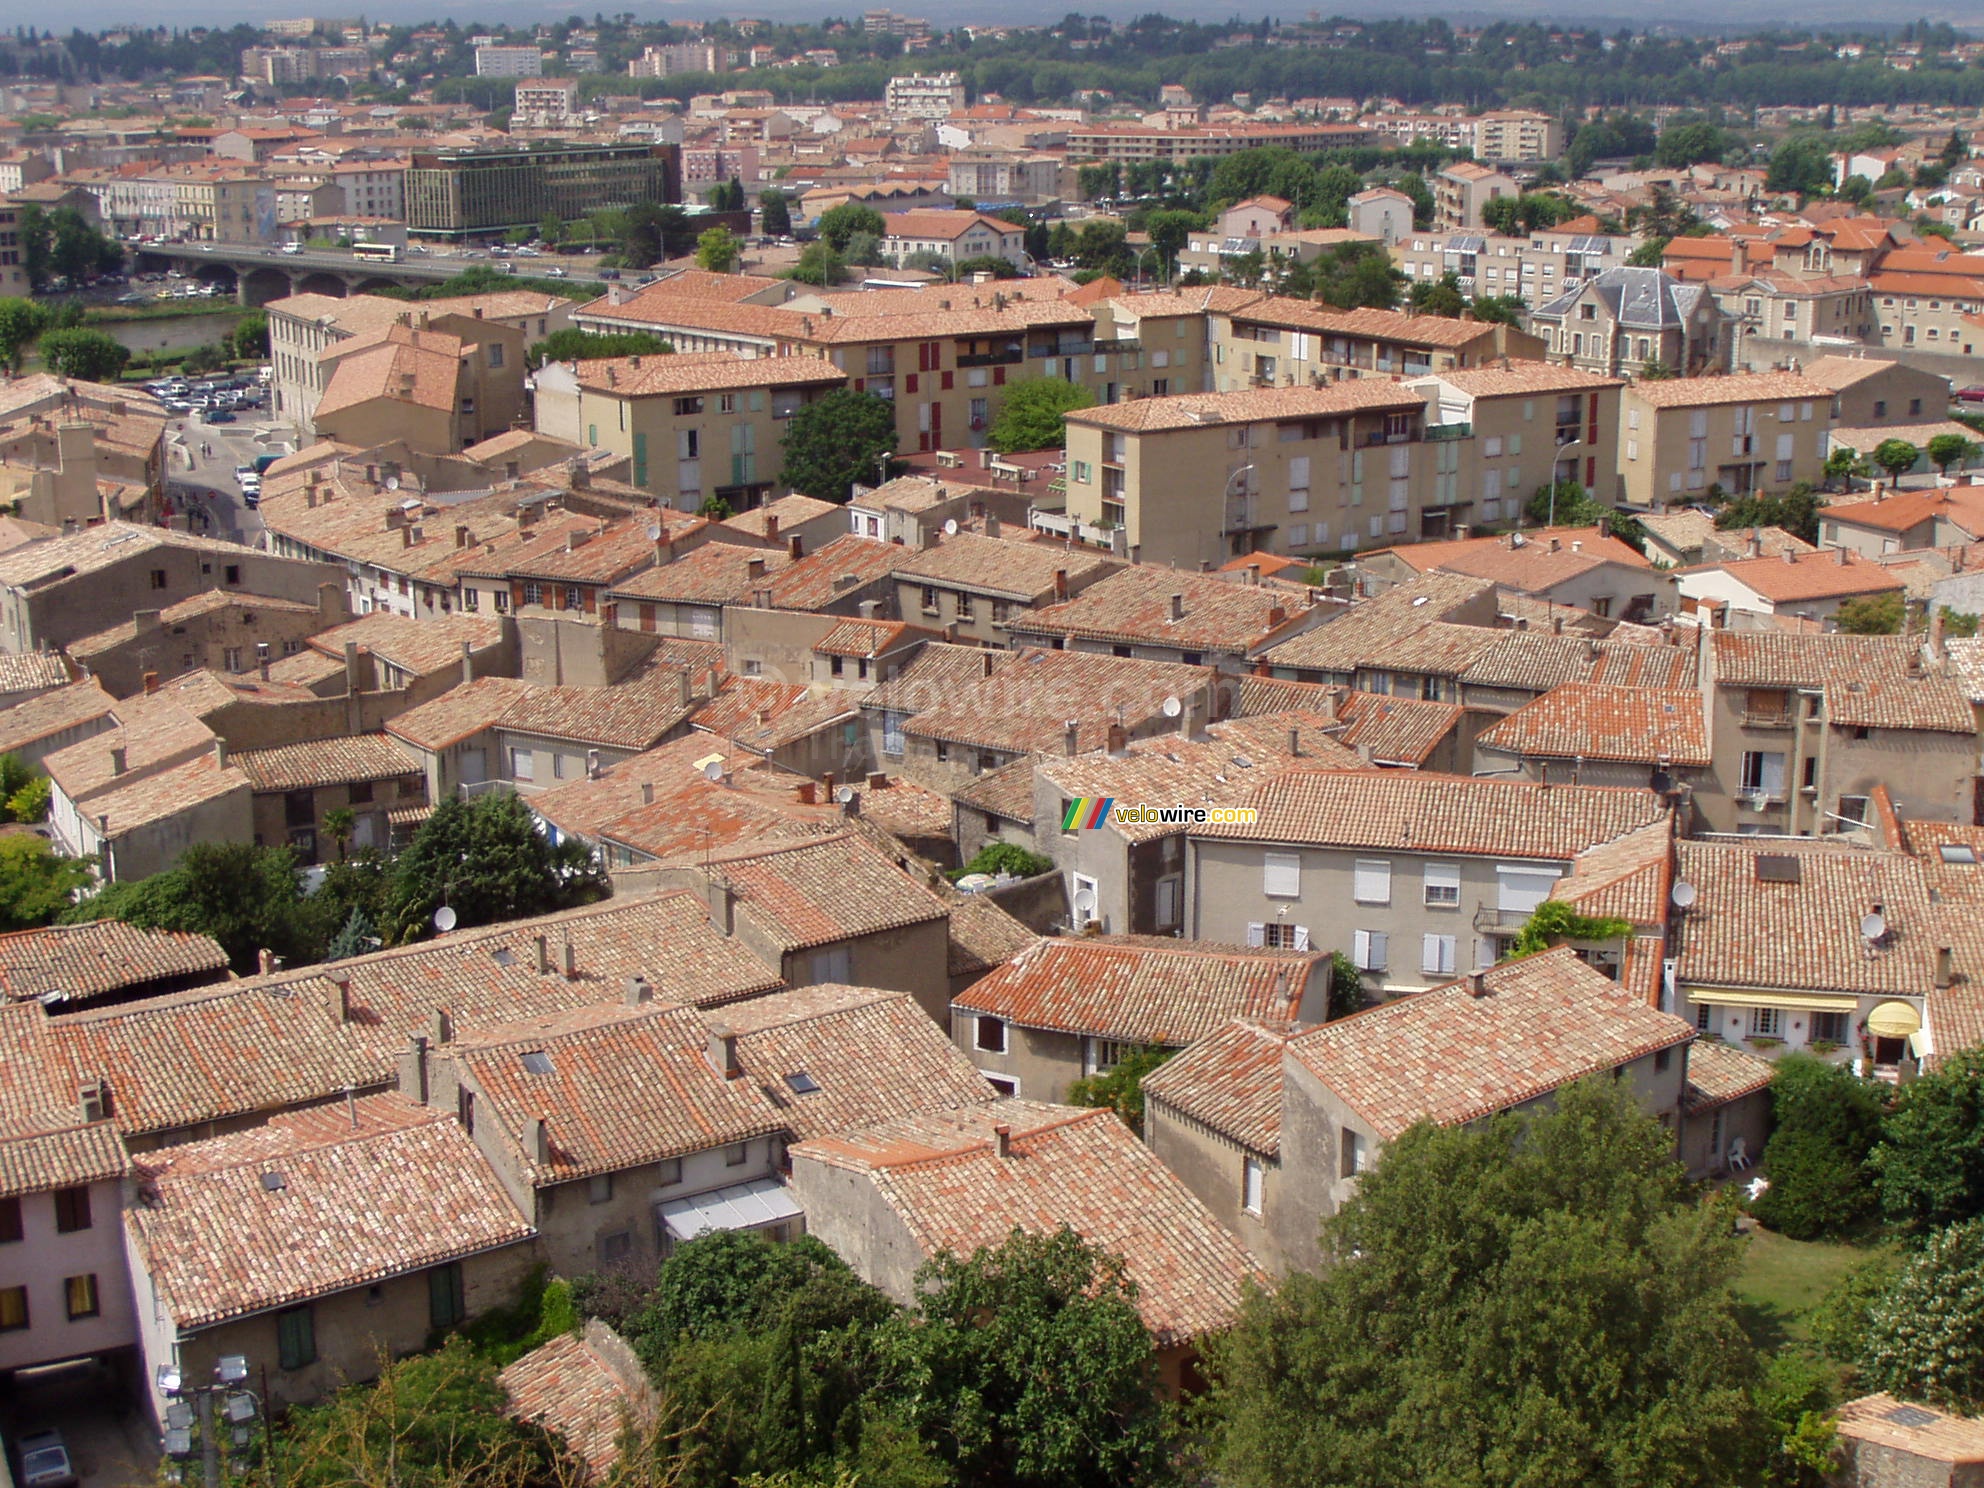 Carcassonne: typical rooftops